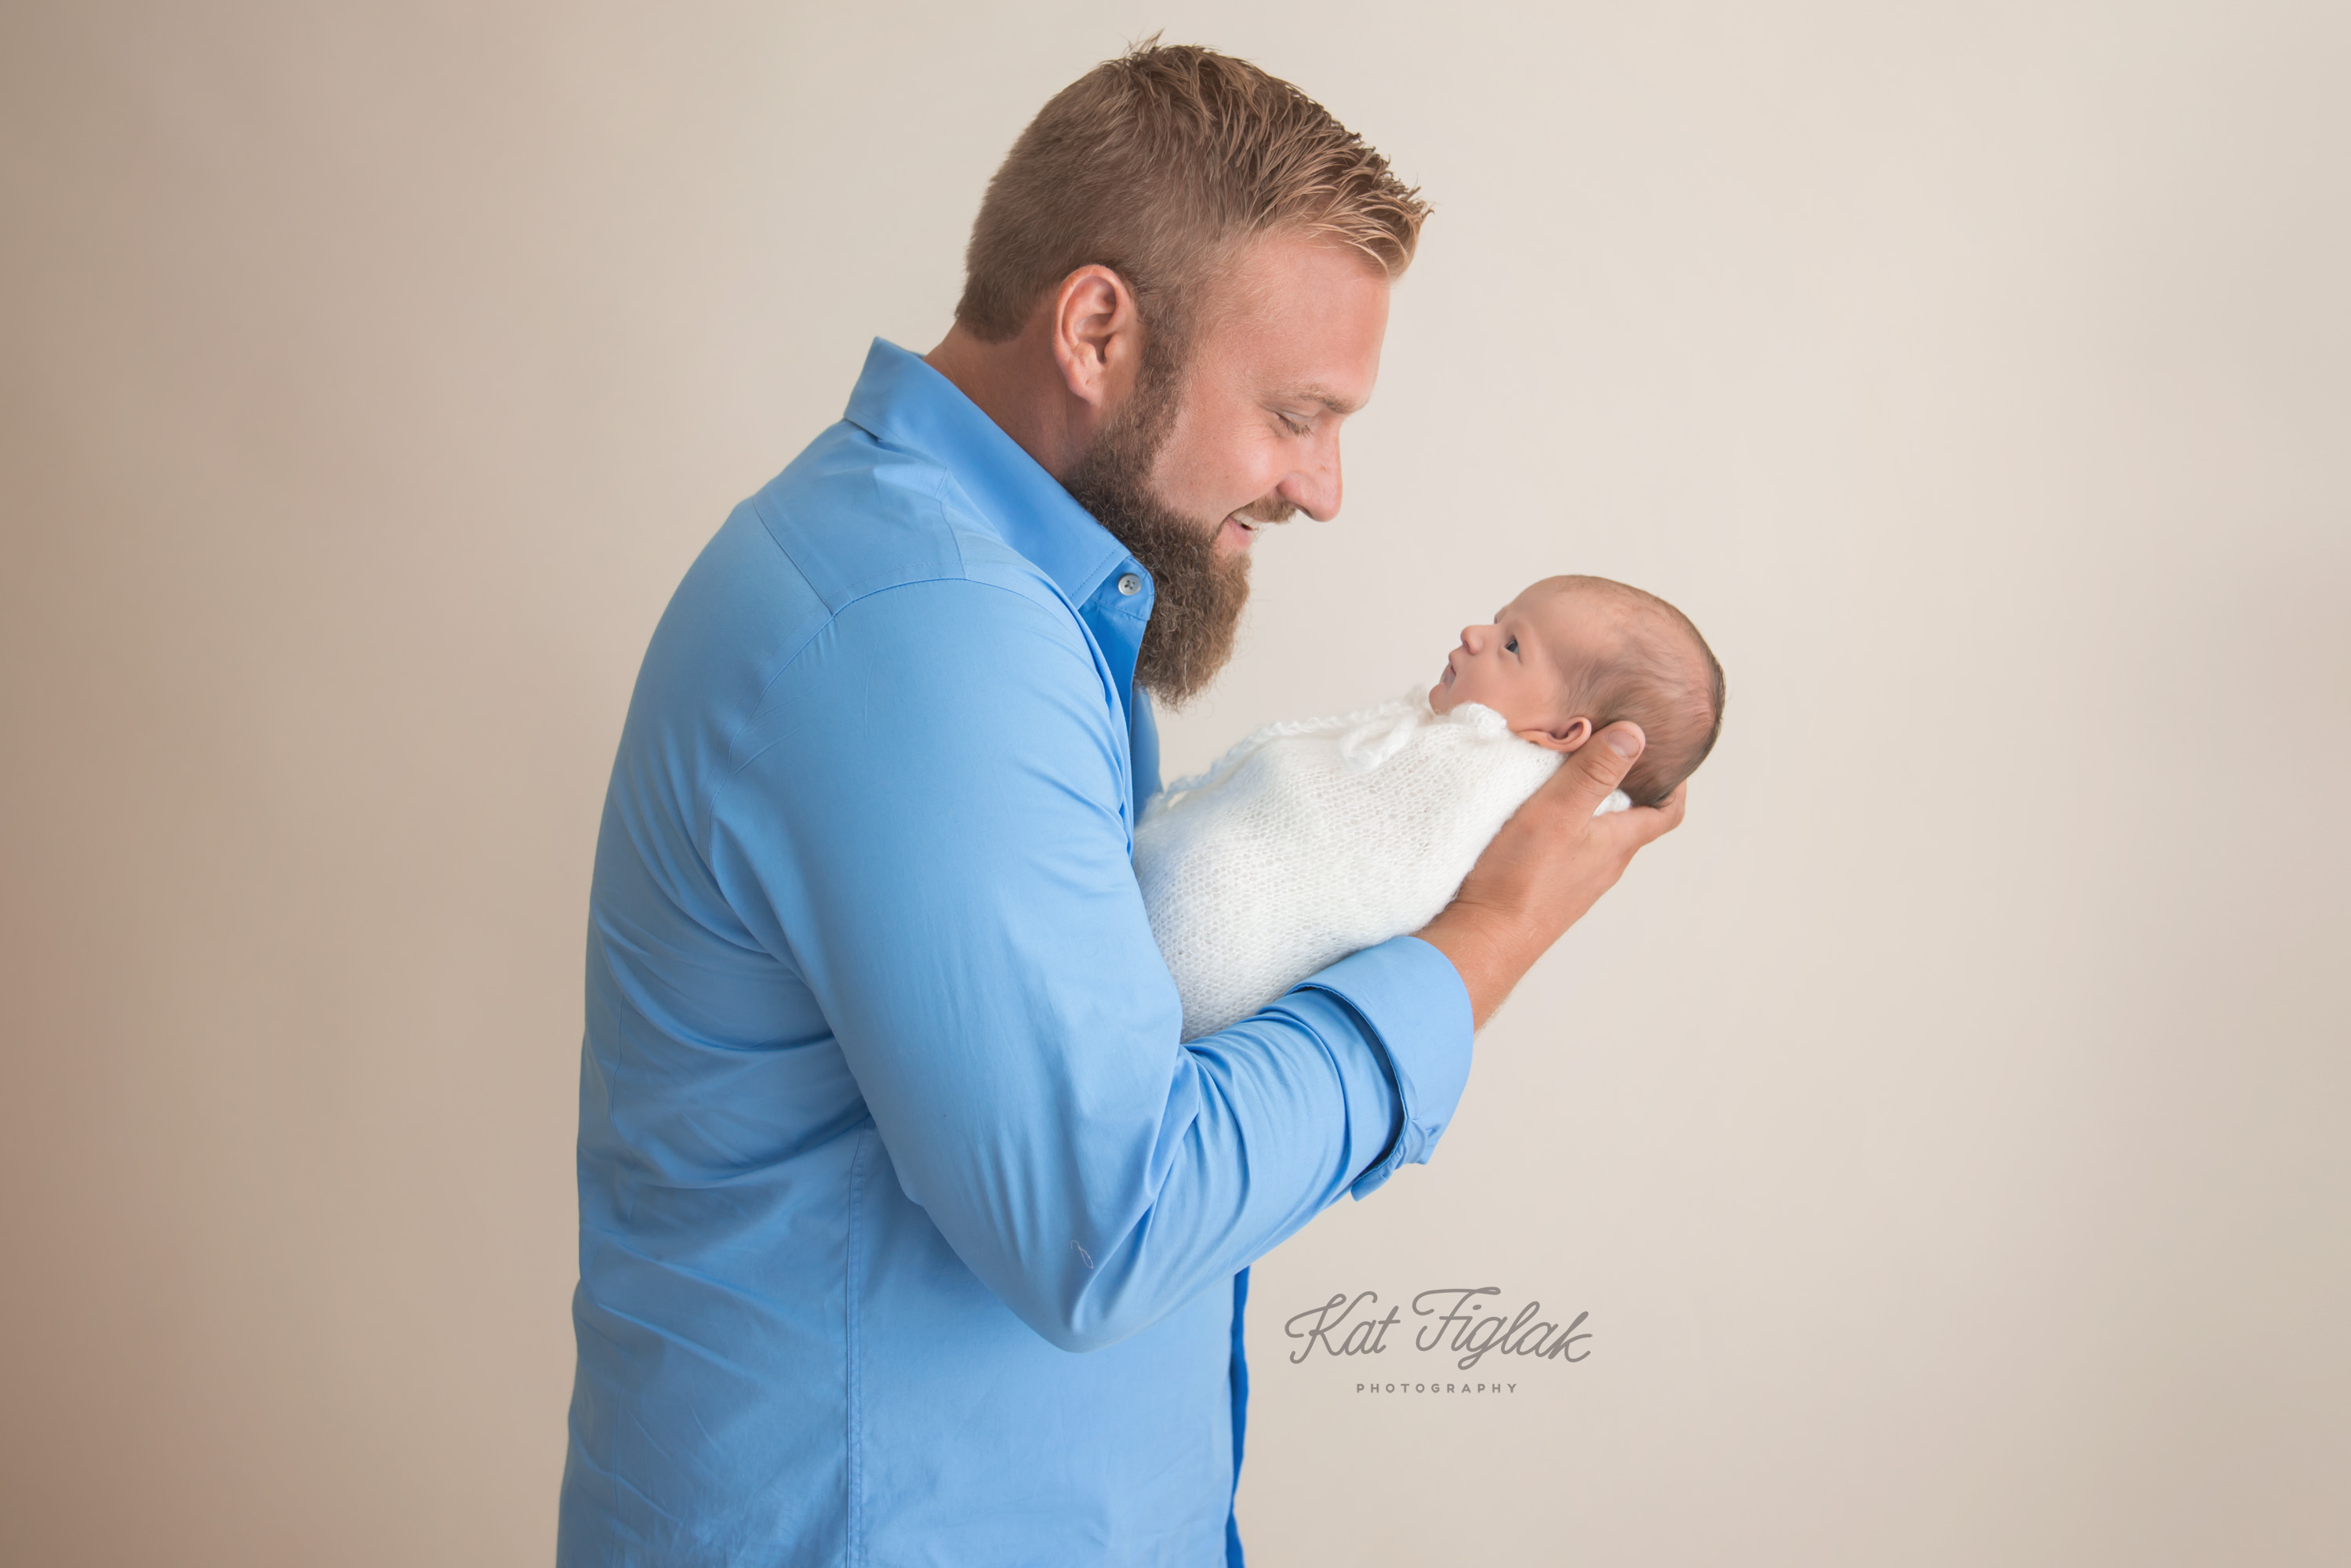 new dad holding his newborn baby girl wearing a blue shirt with a tan background